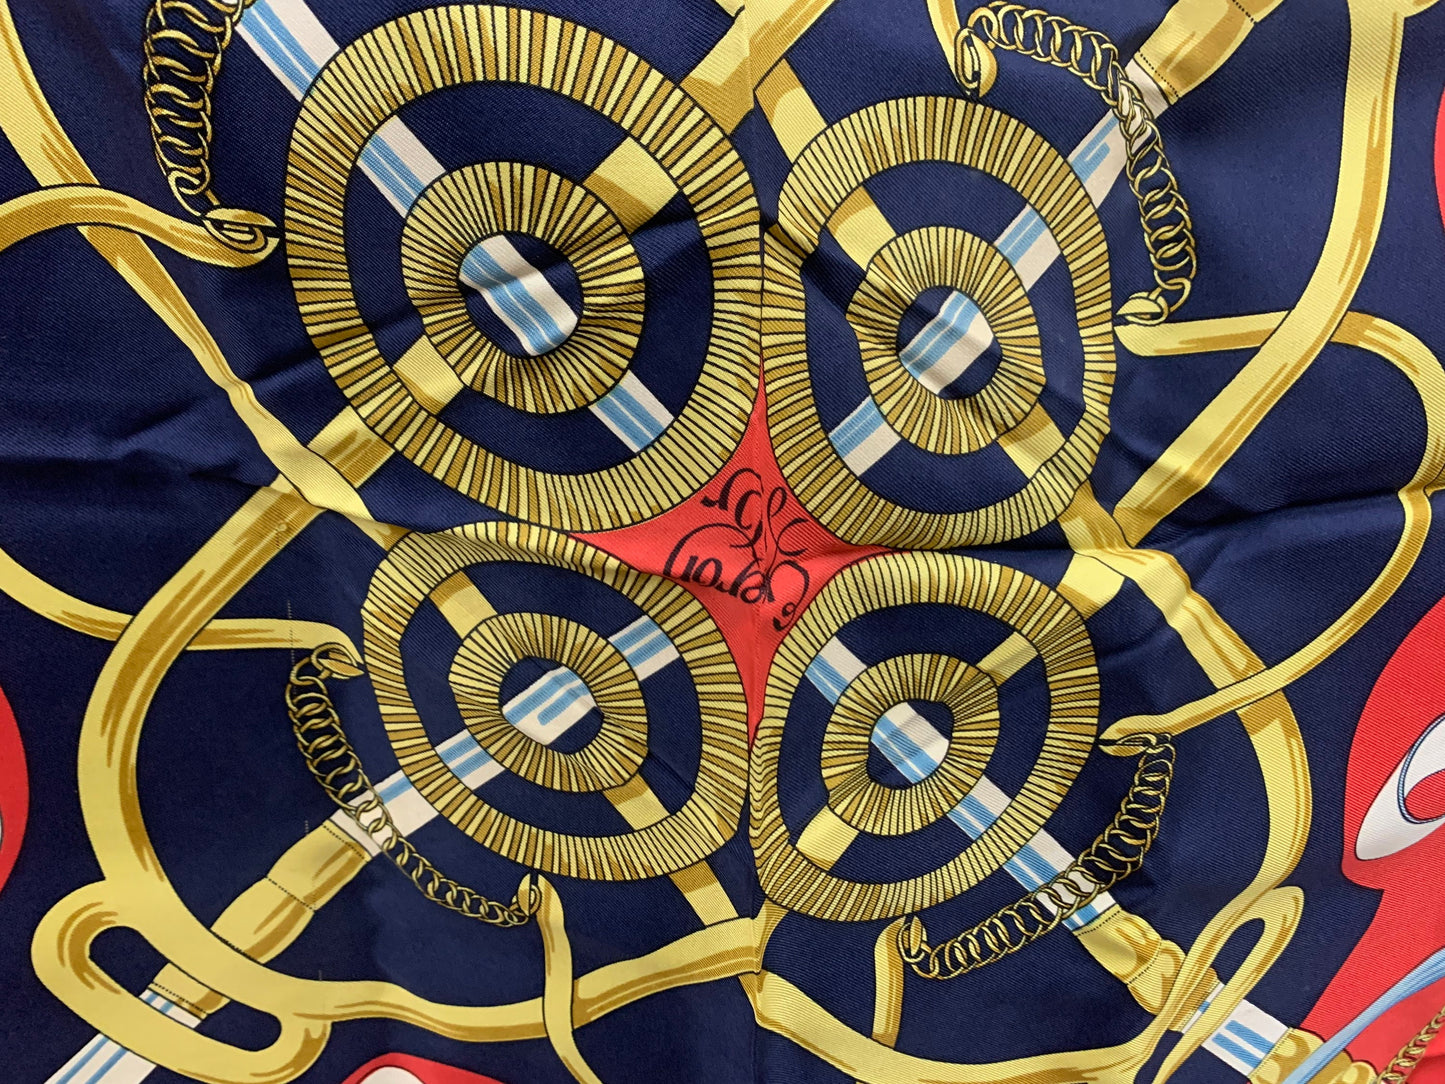 Authentic Hermes scarf navy 35” x 35”